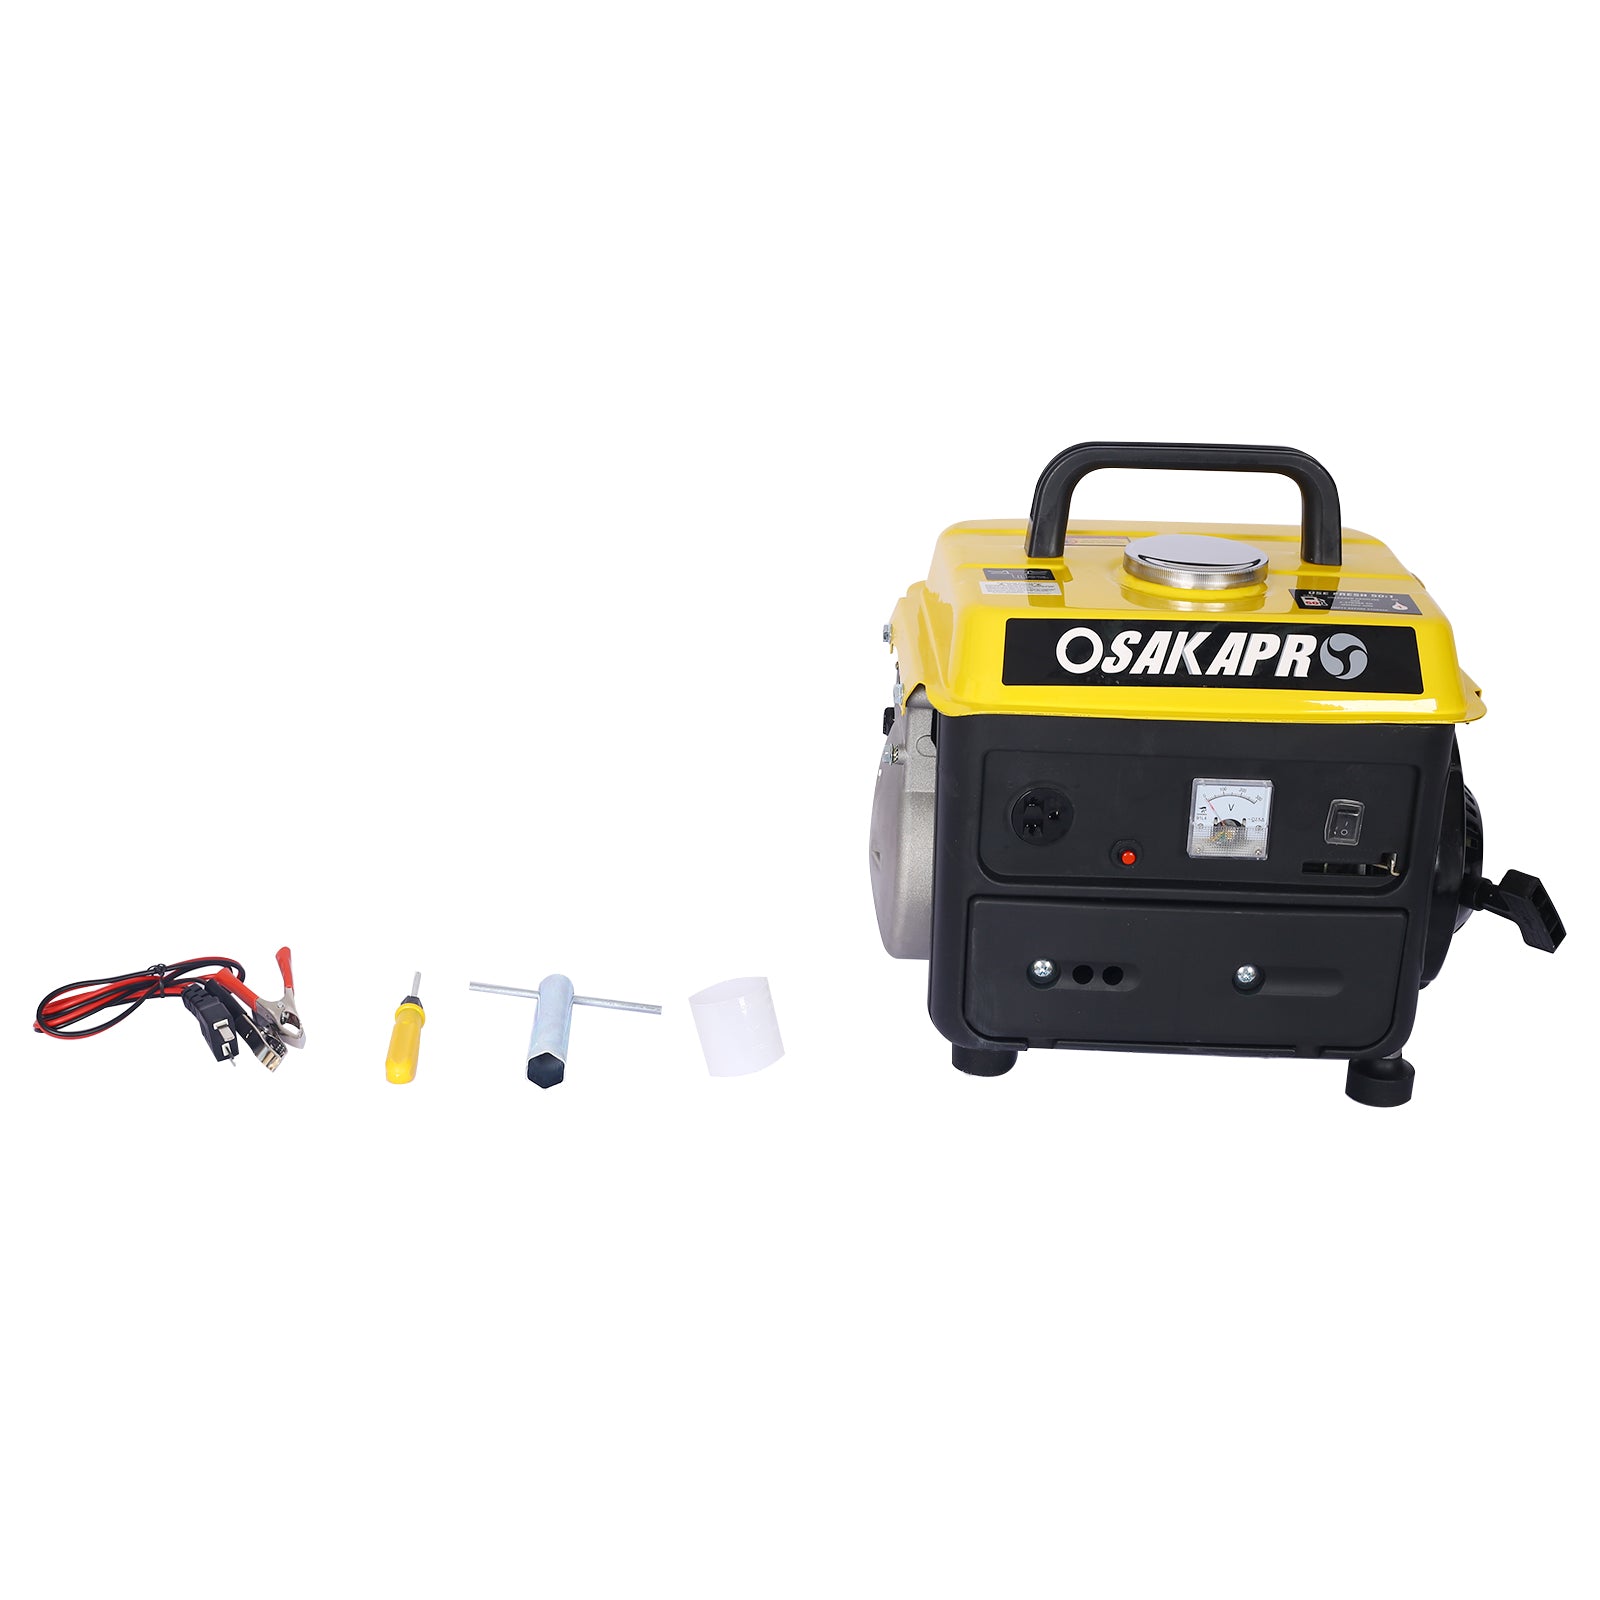 ZNTS Portable Generator, Outdoor generator Low Noise, Gas Powered Generator,Generators for Home Use W46540522